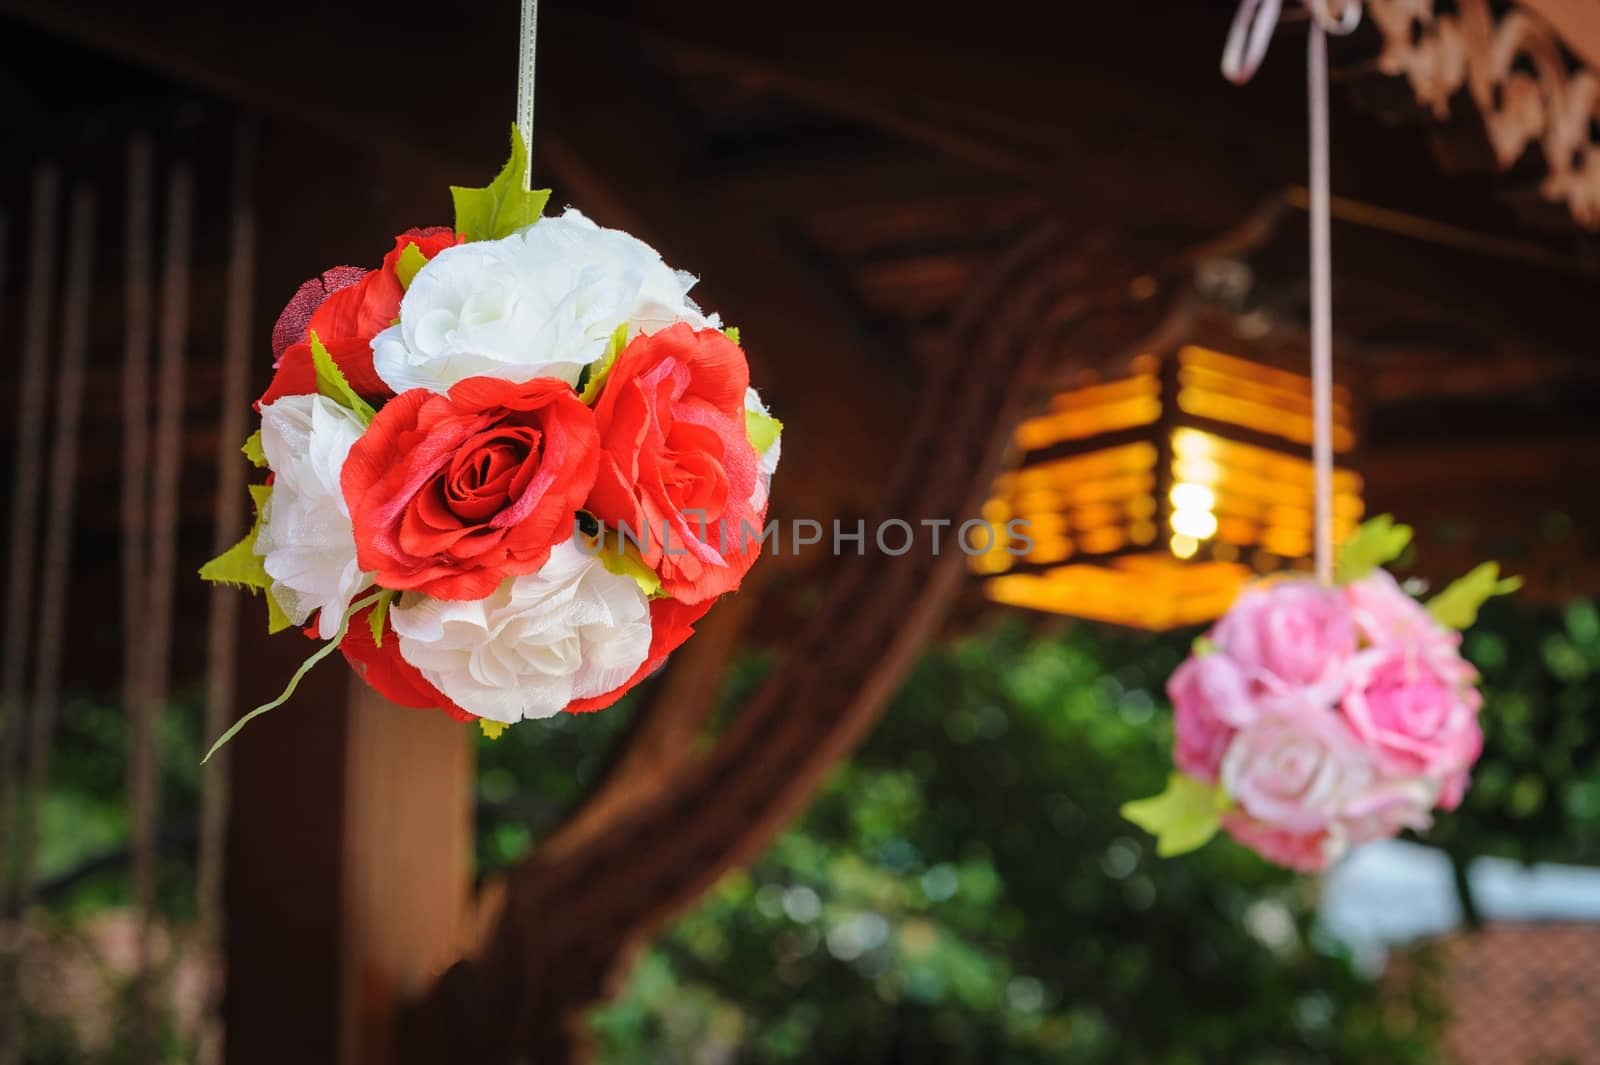 Bouquet of artificial flowers. by ngungfoto